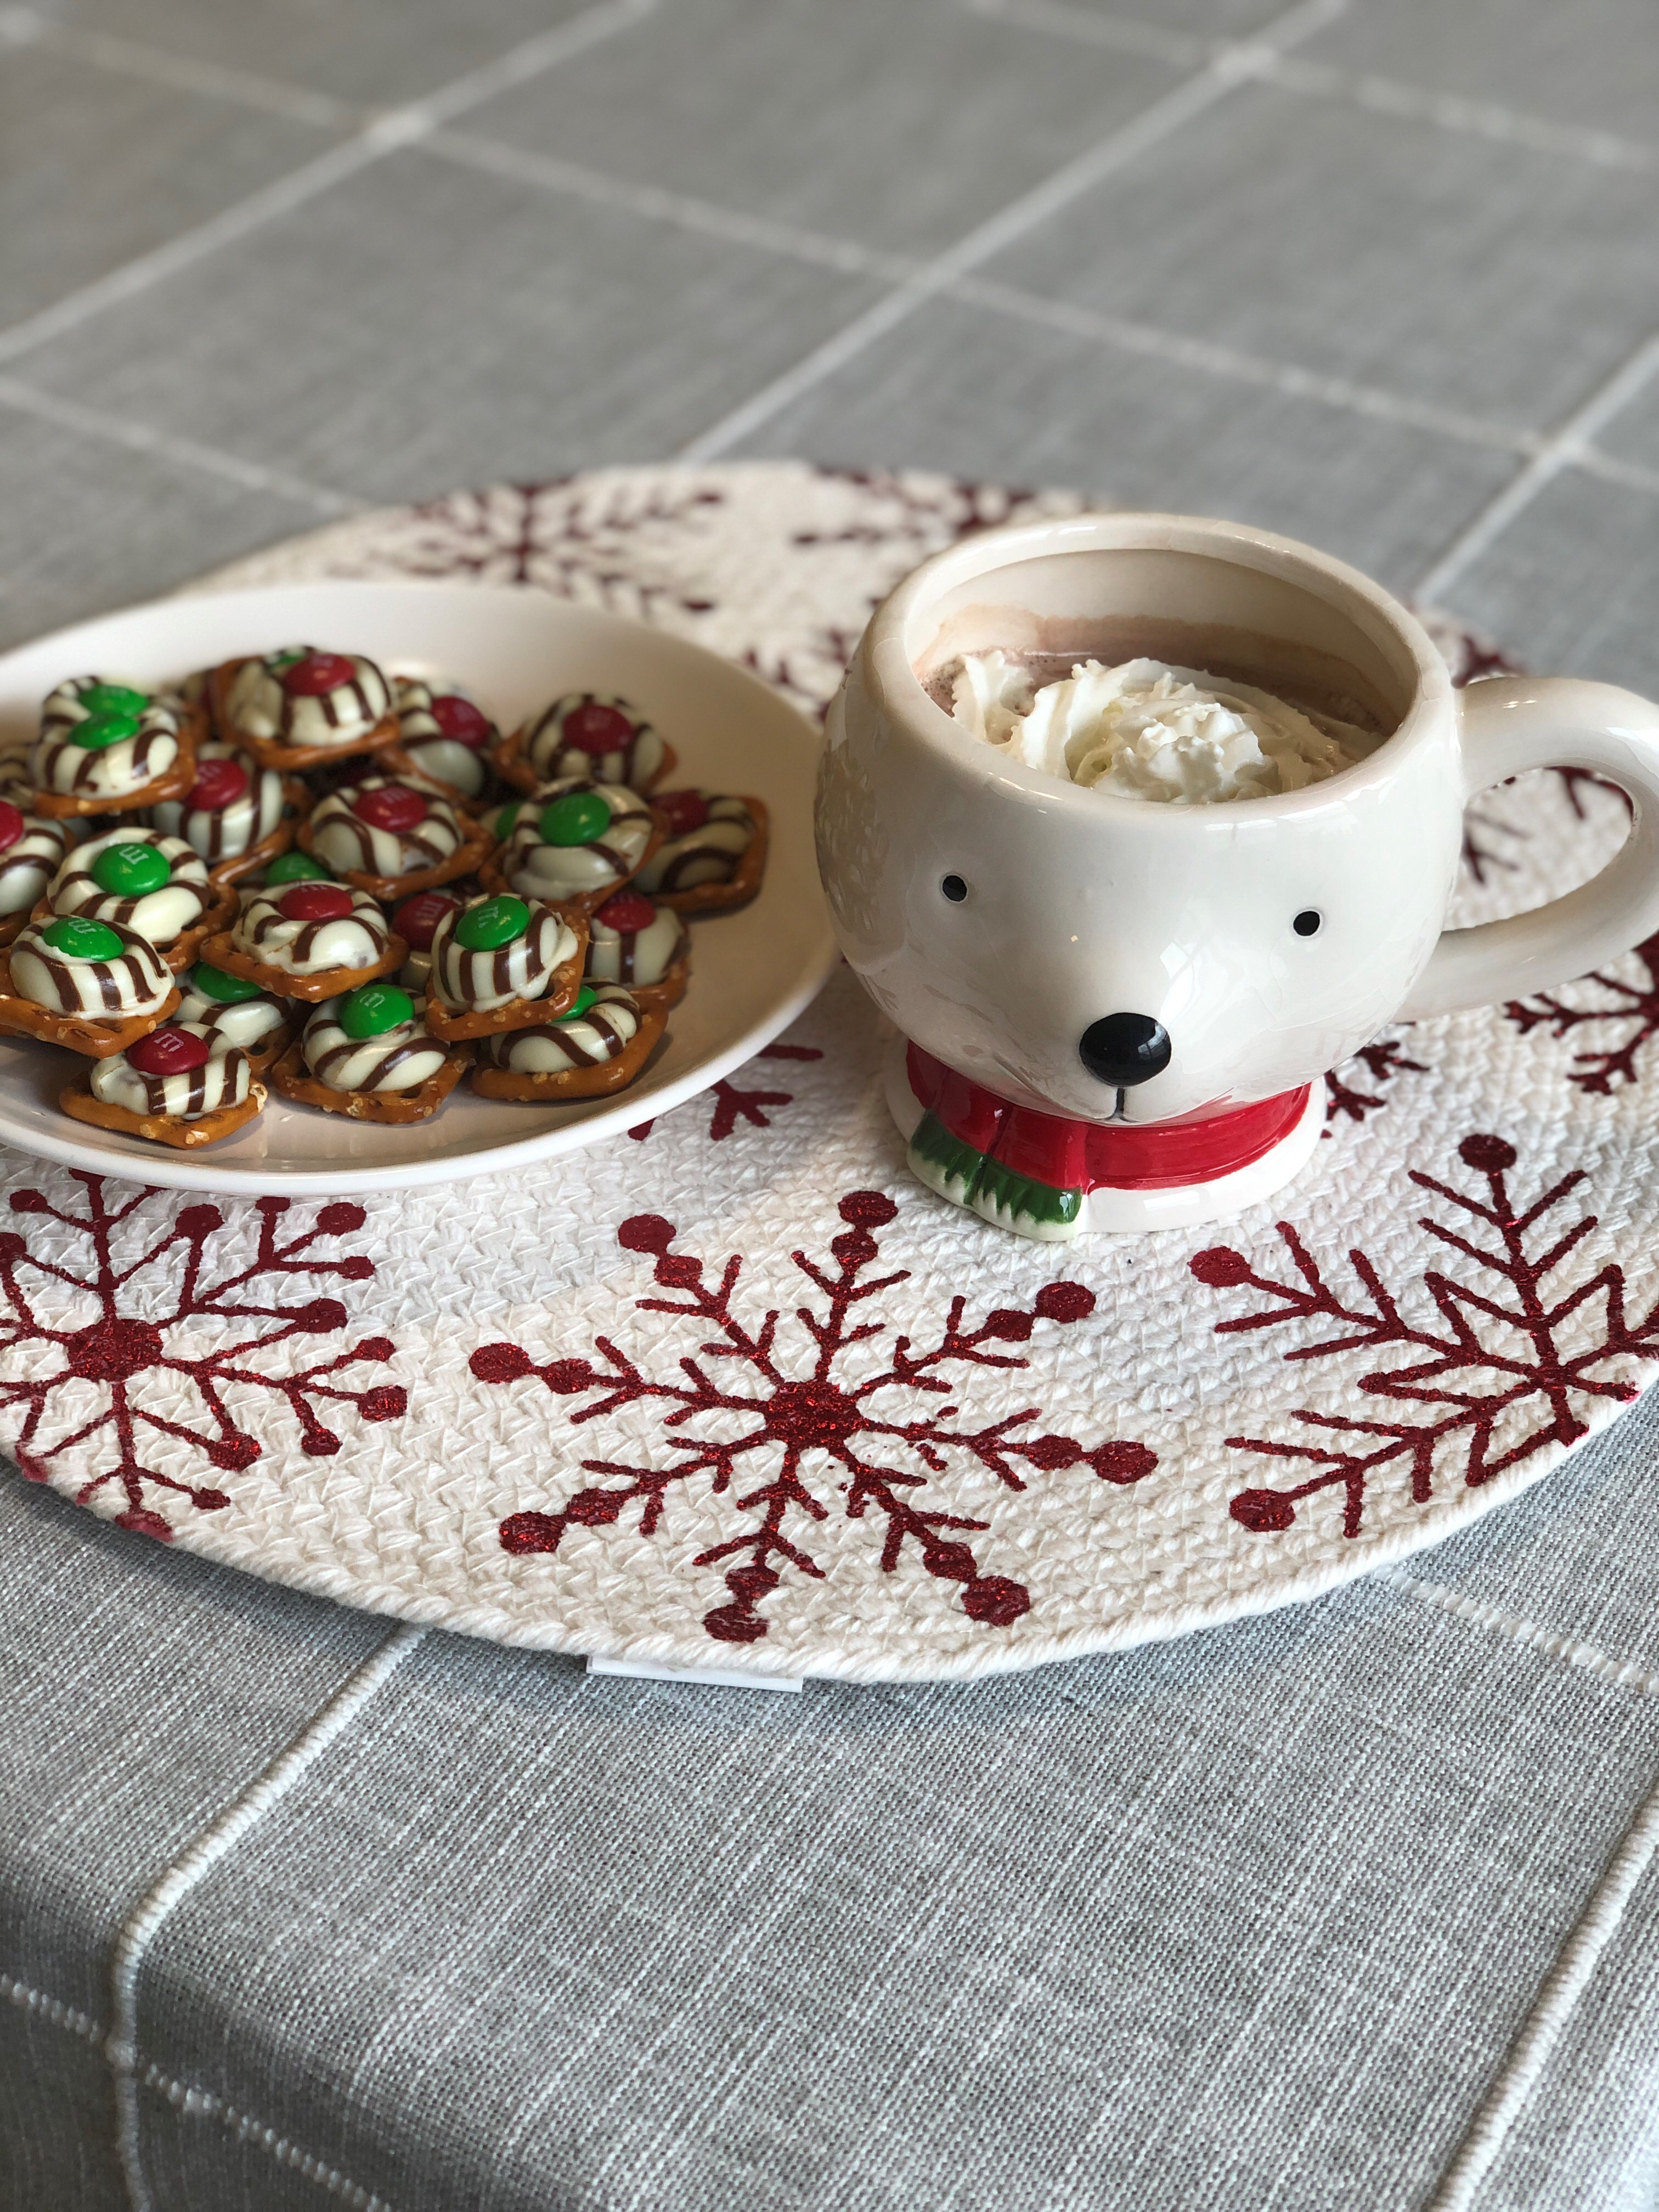 Picture of a ceramic mug shaped like a polar bear head wearing a red scarf around its neck, next to a plate or pretzel hug candies. The mug is filled will hot chocolate and whipped cream. The mug an plate sit on a white quilted placemat white a red snowflake pattern.